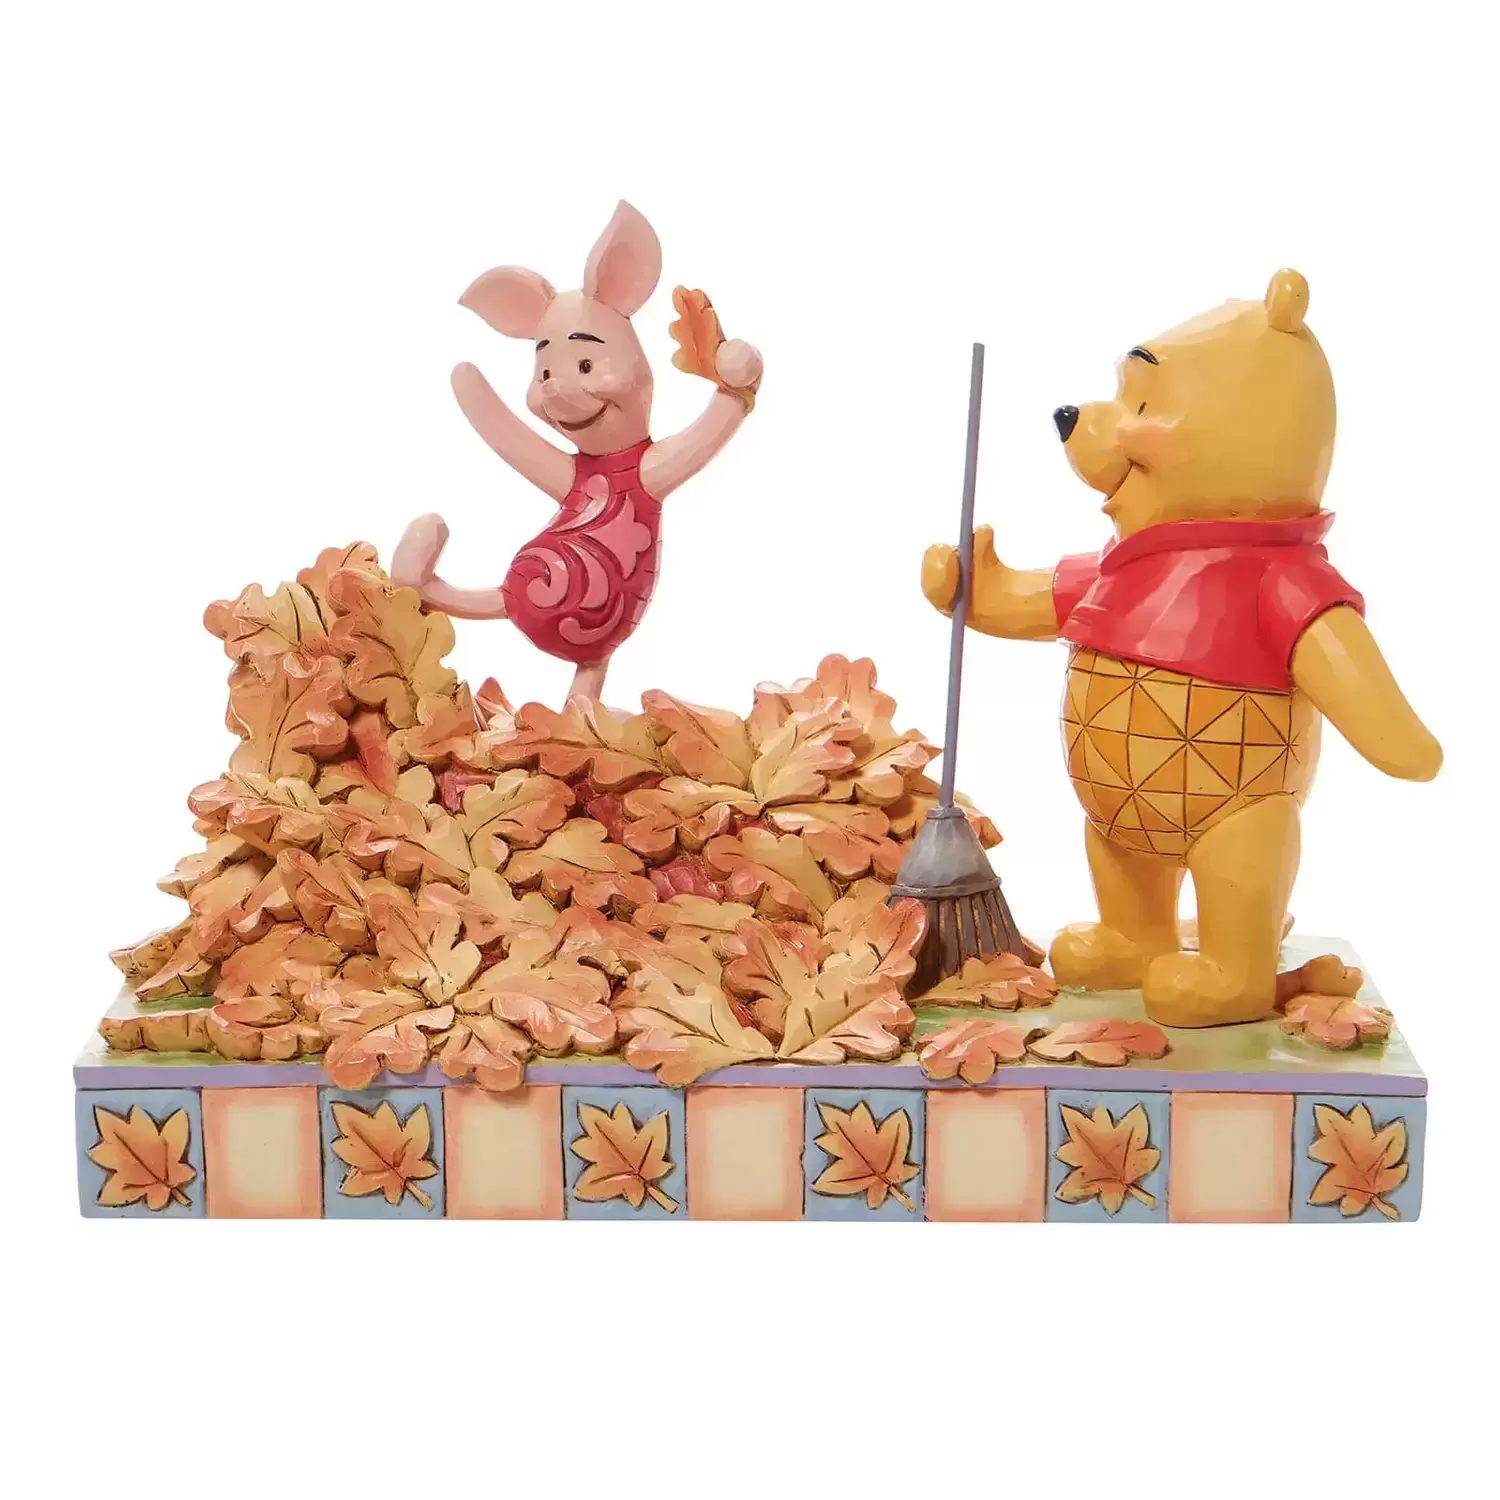 Disney Traditions by Jim Shore - Piglet & Poo Figurine